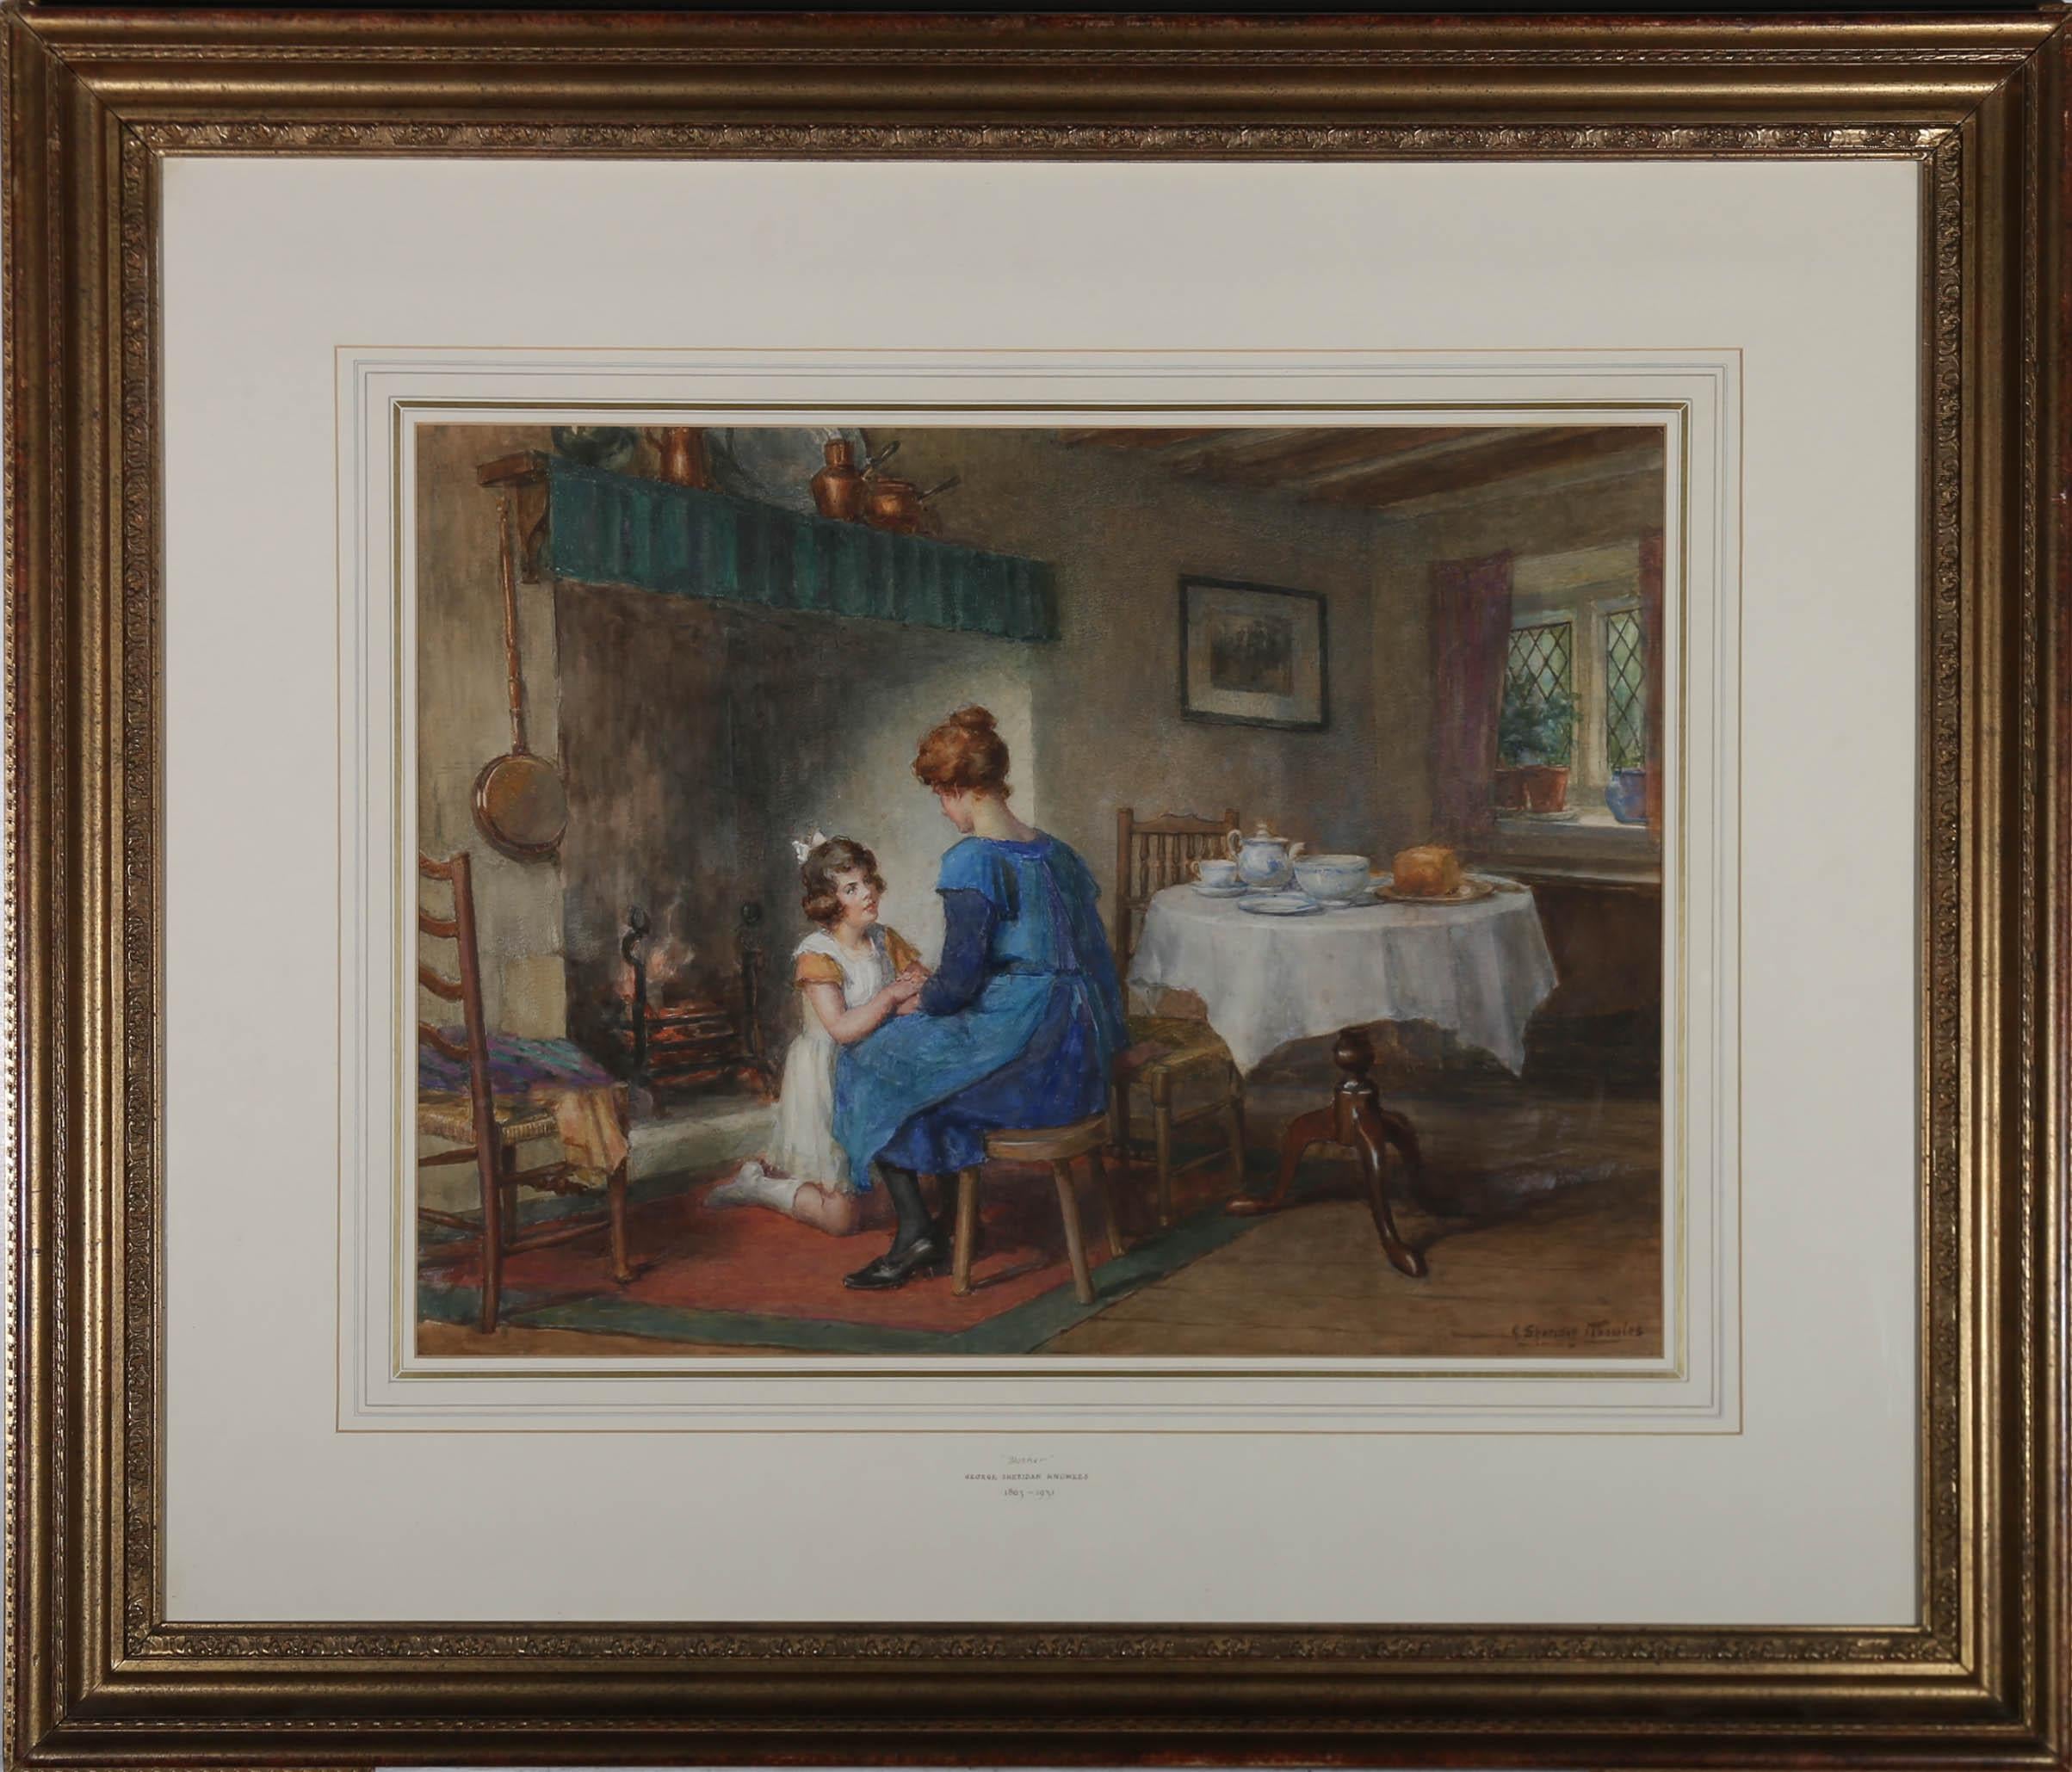 A fine watercolour scene by genre artist George Sheridan Knowles (1863-1931), depicting a warm hearted moment between a mother and daughter. The young girl has been caught by Knowles, on her knees, consoling her mother in front of a warm open fire.